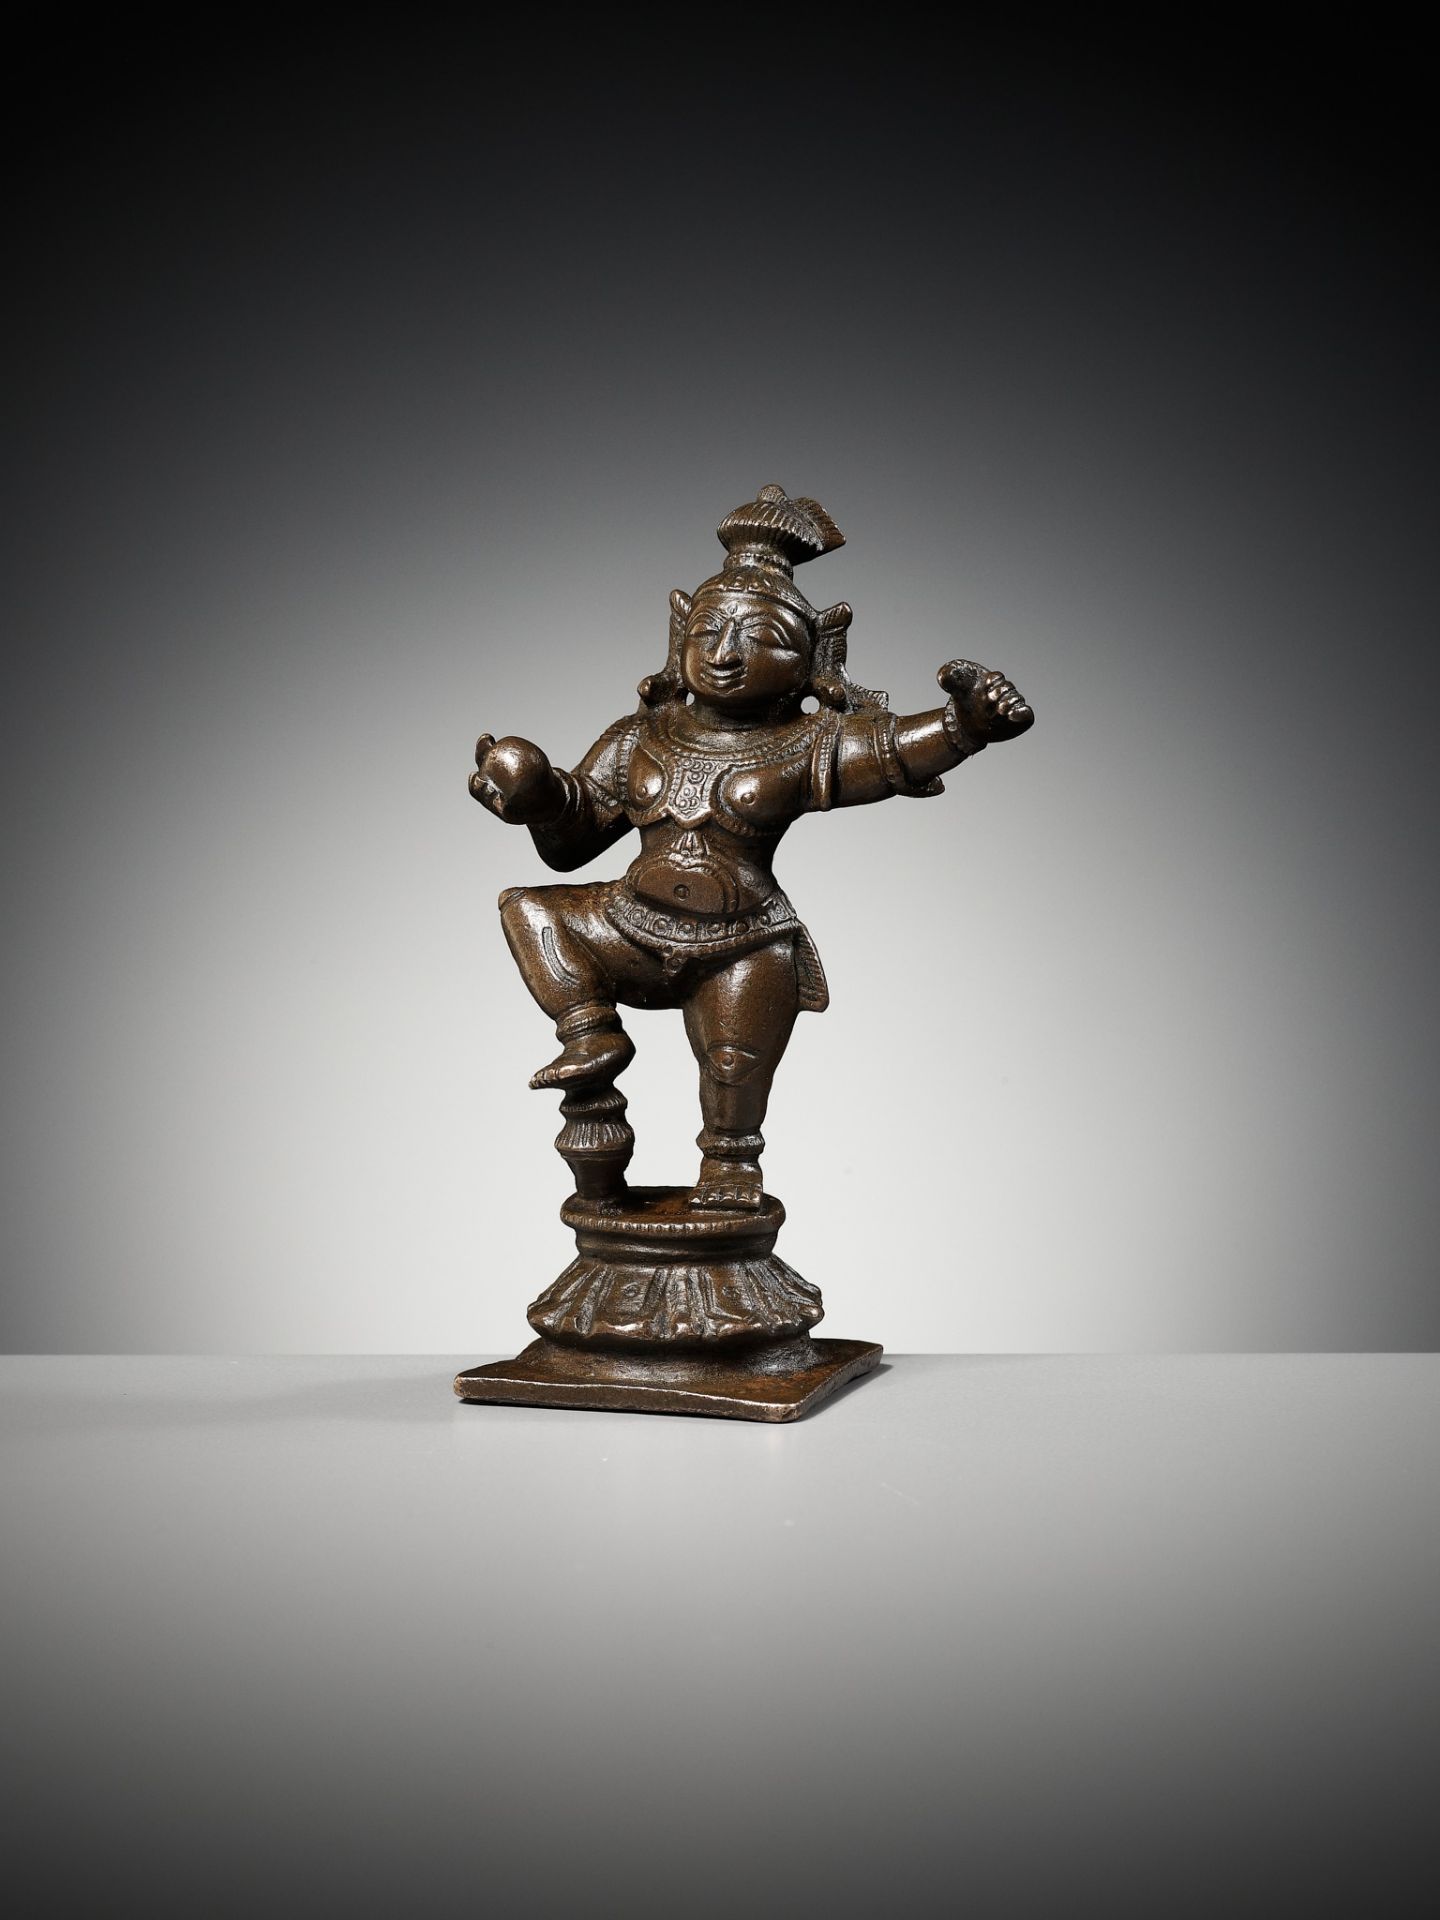 A COPPER ALLOY FIGURE OF DANCING KRISHNA, SOUTH INDIA, 17TH-18TH CENTURY - Image 12 of 13